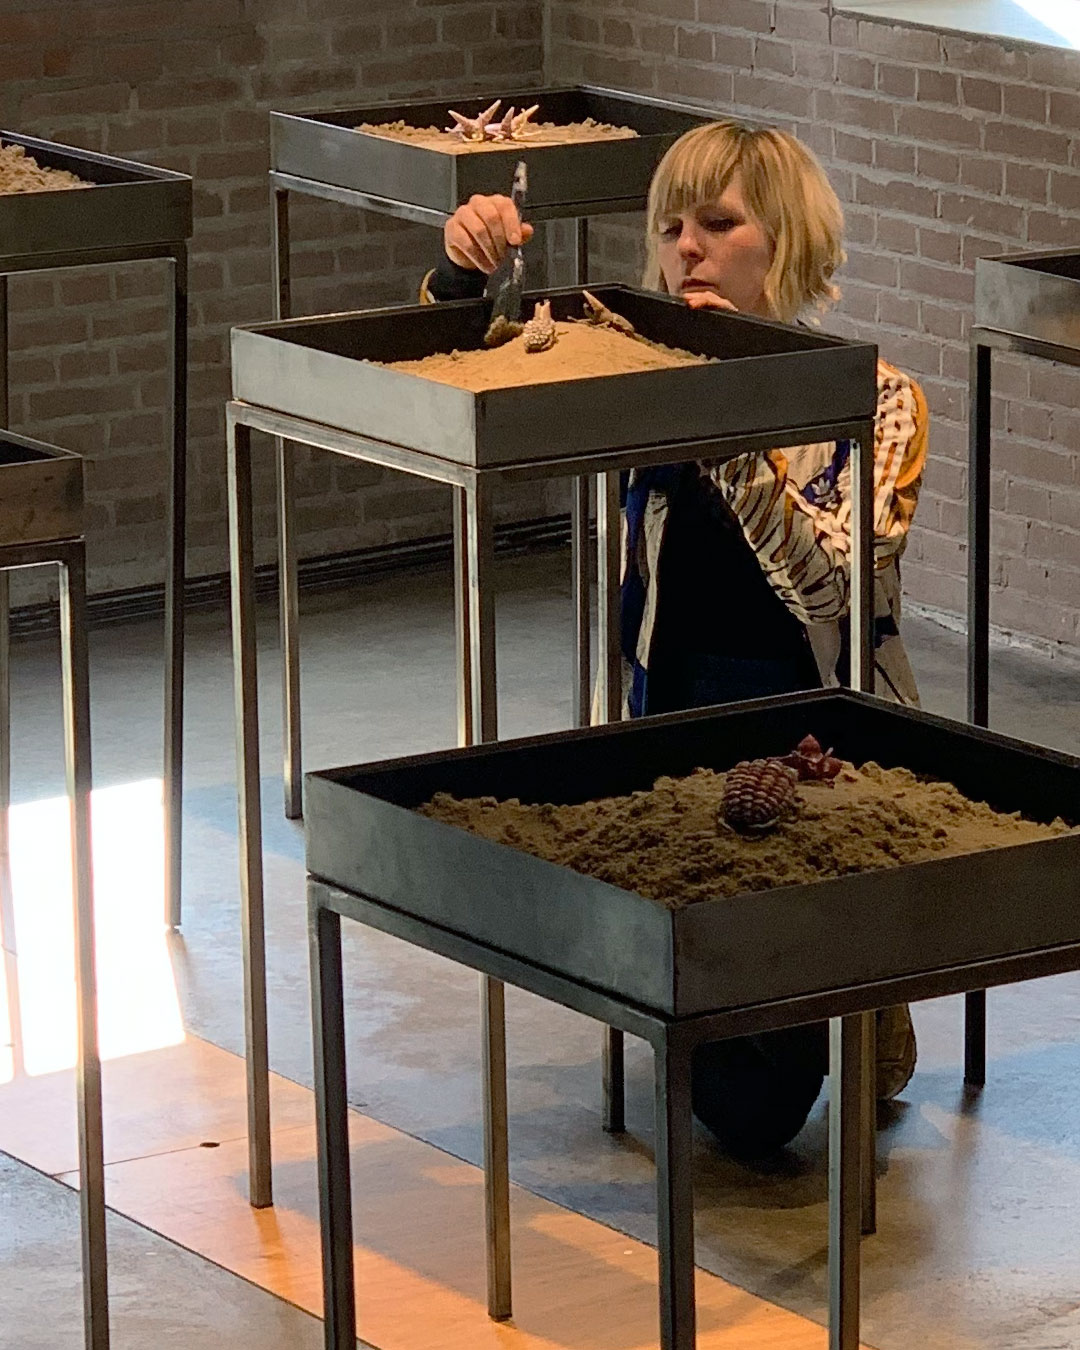 Märta Mattsson setting up her exhibition at Marzee in March 2019